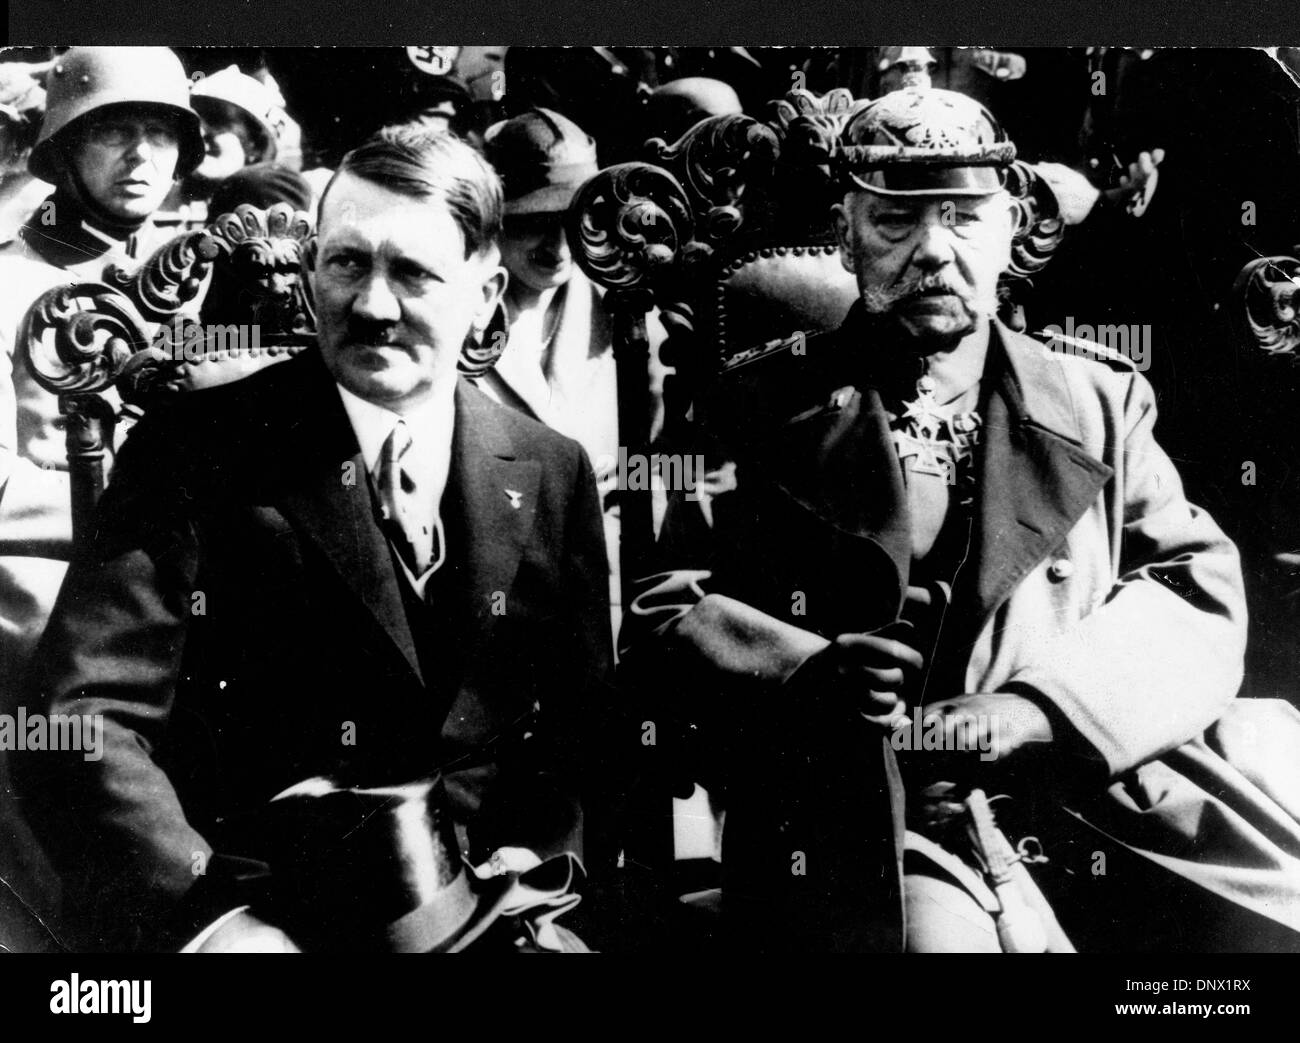 Aug 29, 1933; Berlin, Germany; ADOLF HITLER Imperial Chancellor of Germany and the leader of the Nazi Party with the President of Germany PAUL VON HINDENBURG. Adolf Hitler (April 20, 1889ÐApril 30, 1945) was the Fuhrer und Reichskanzler (Leader and Imperial chancellor) of Germany from 1933 to his death. He was leader of the National Socialist German Workers Party (NSDAP), better kn Stock Photo